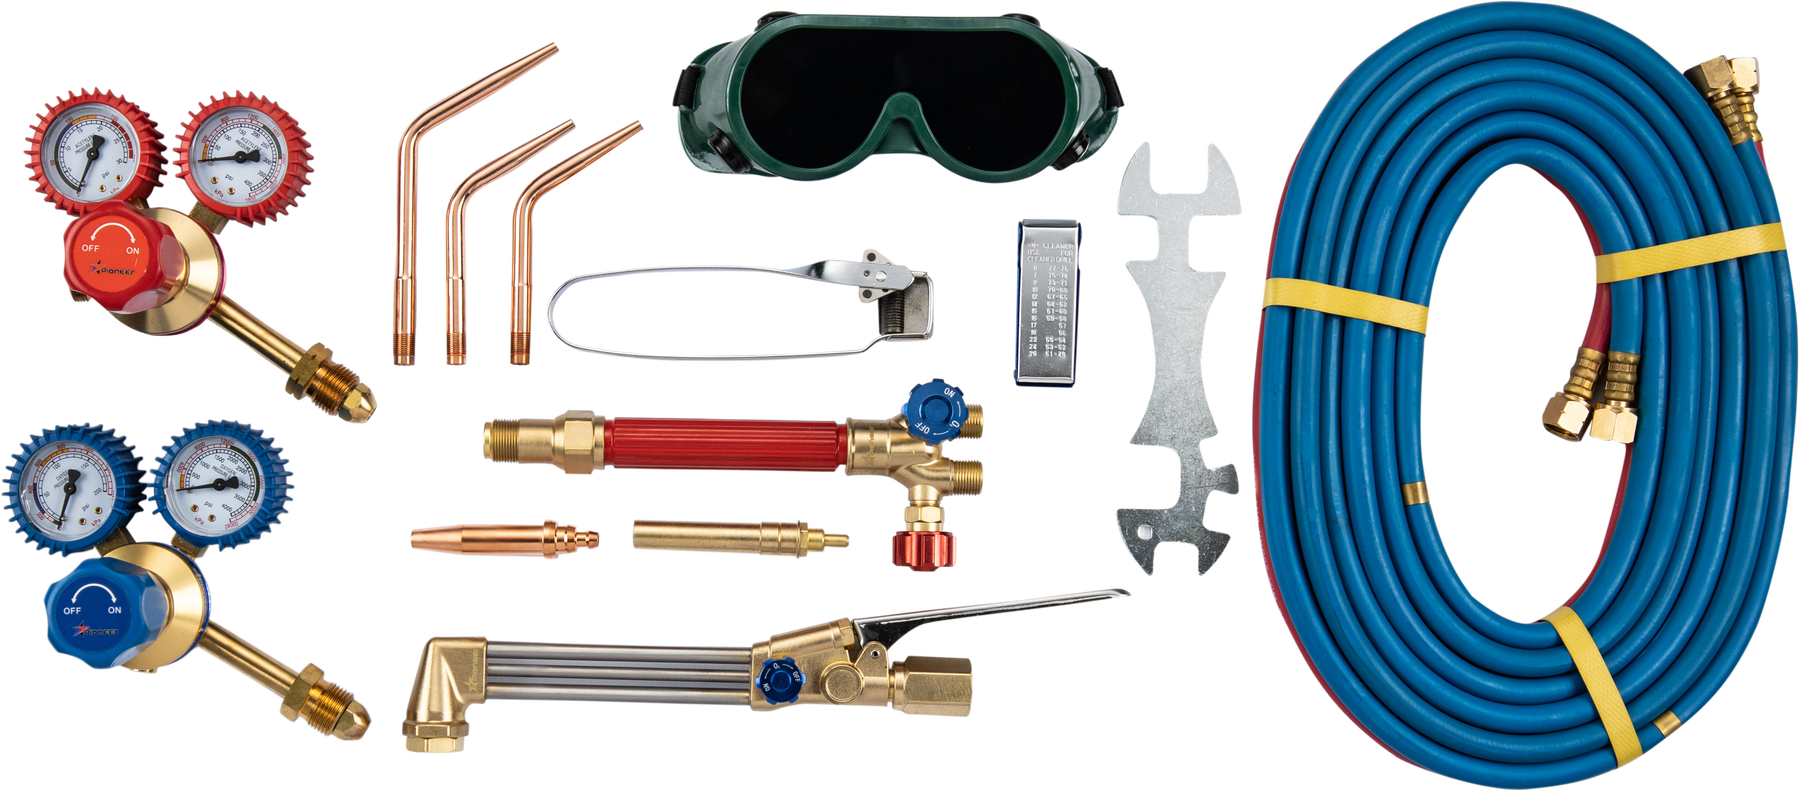 PIONEER Professional Welding & Cutting Combination Kit